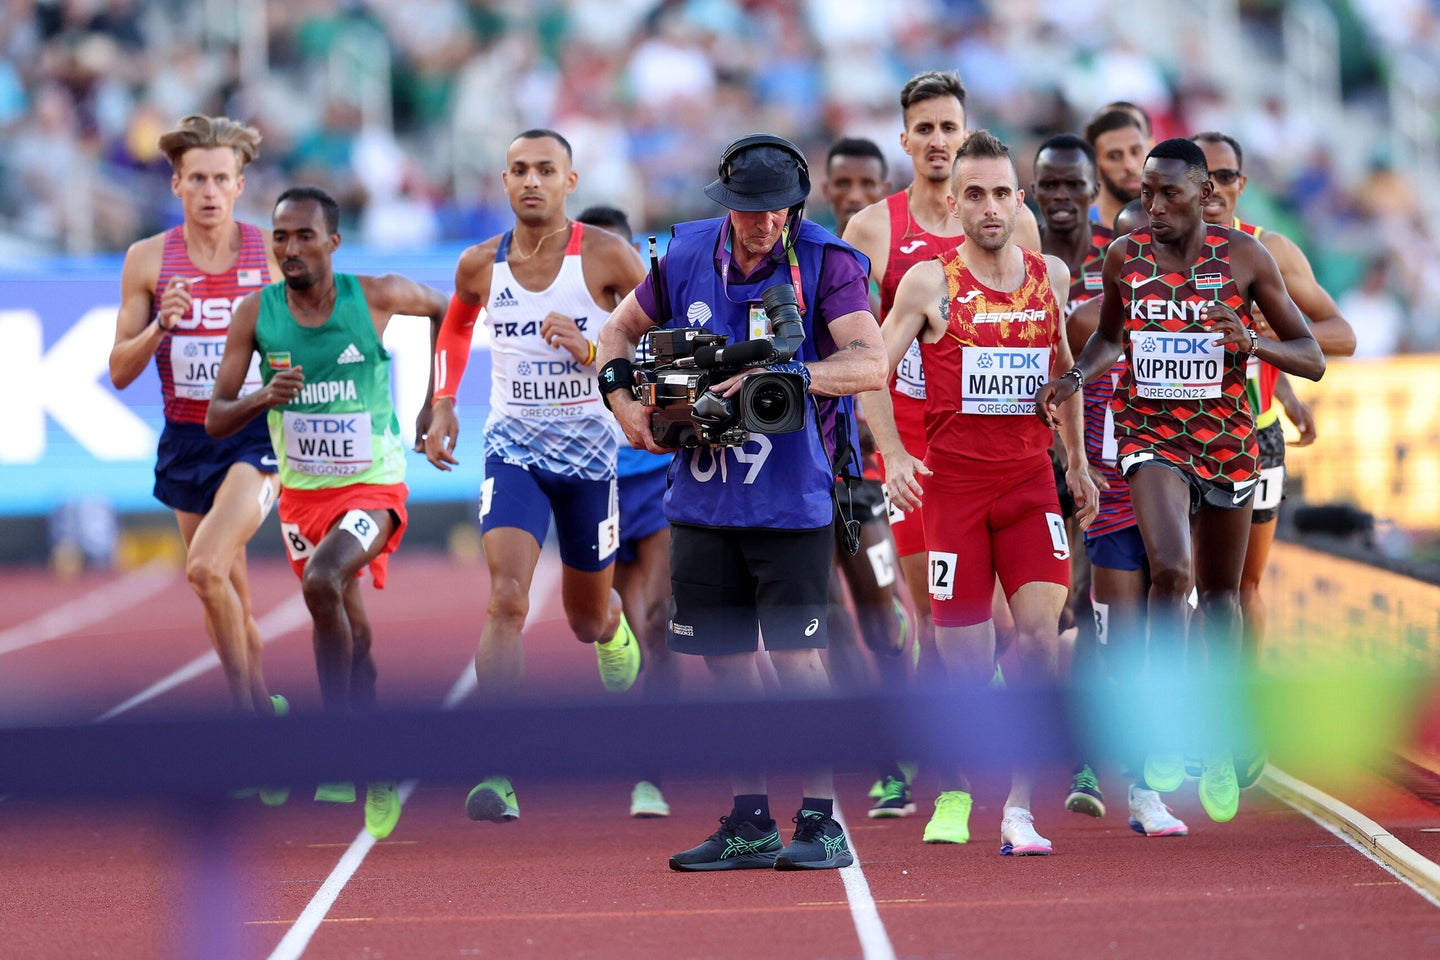 Athletes in the Men's 3000m Steeplechase Final run around a cameraman on the track.